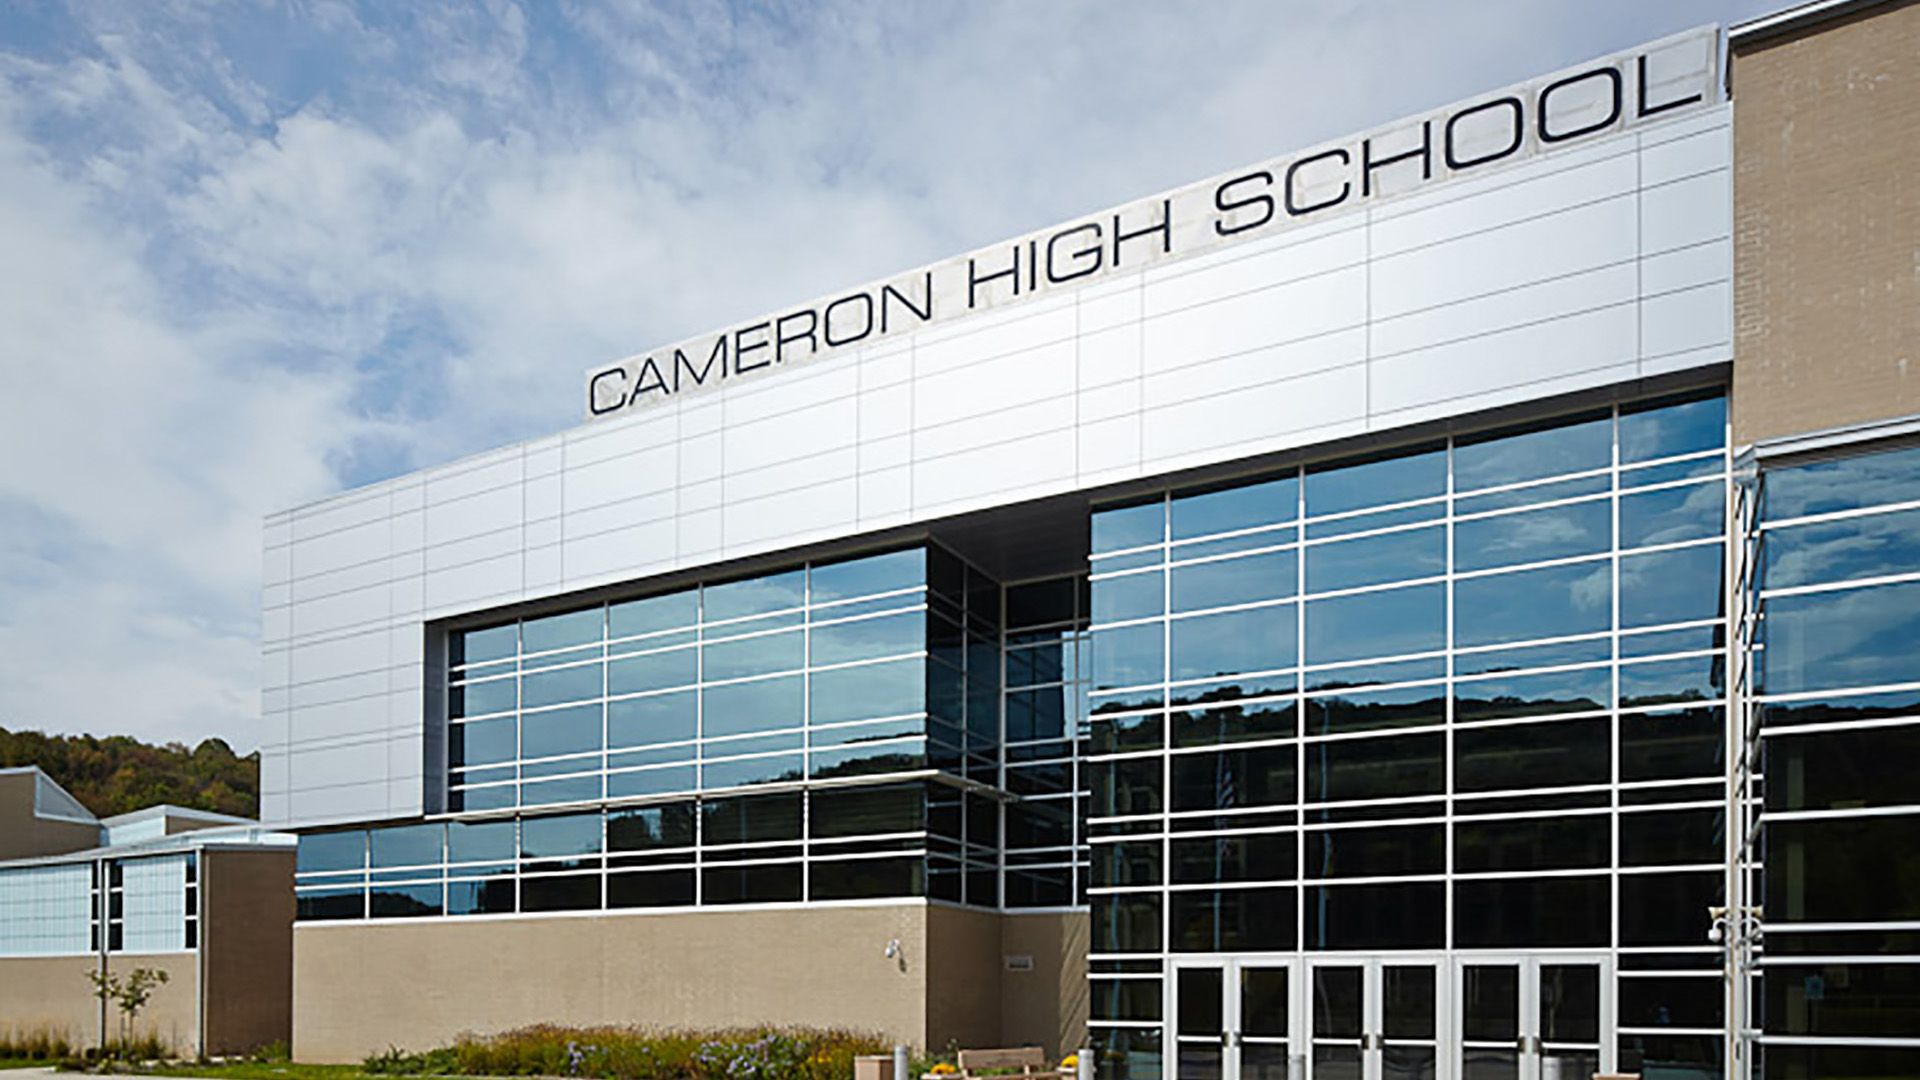 Food as Culture: Building Community and a Sustainable Future through Agriculture Education at Cameron High School. Green Schools National Network